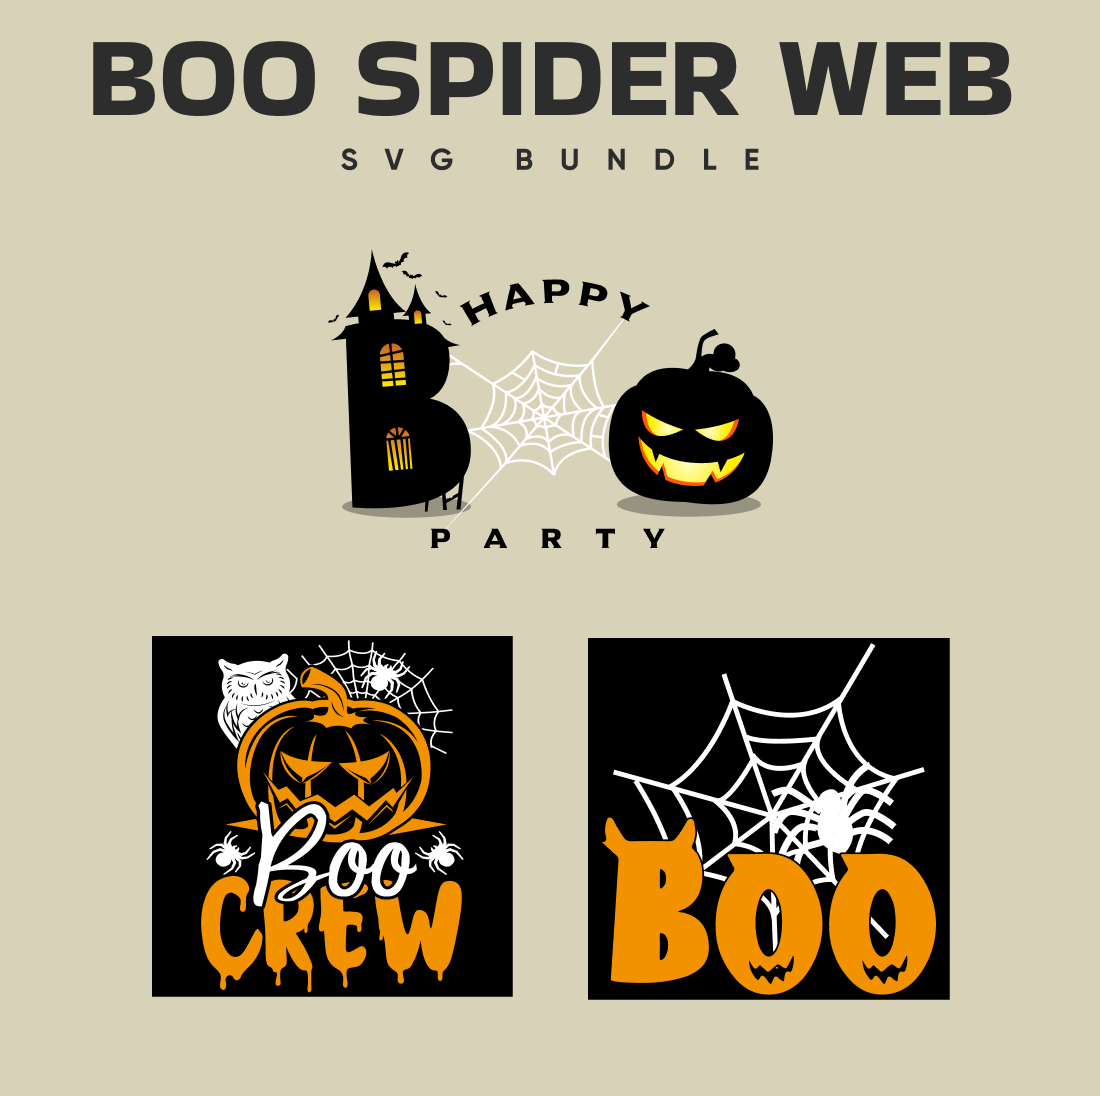 Set of halloween themed logos for boo spider web.